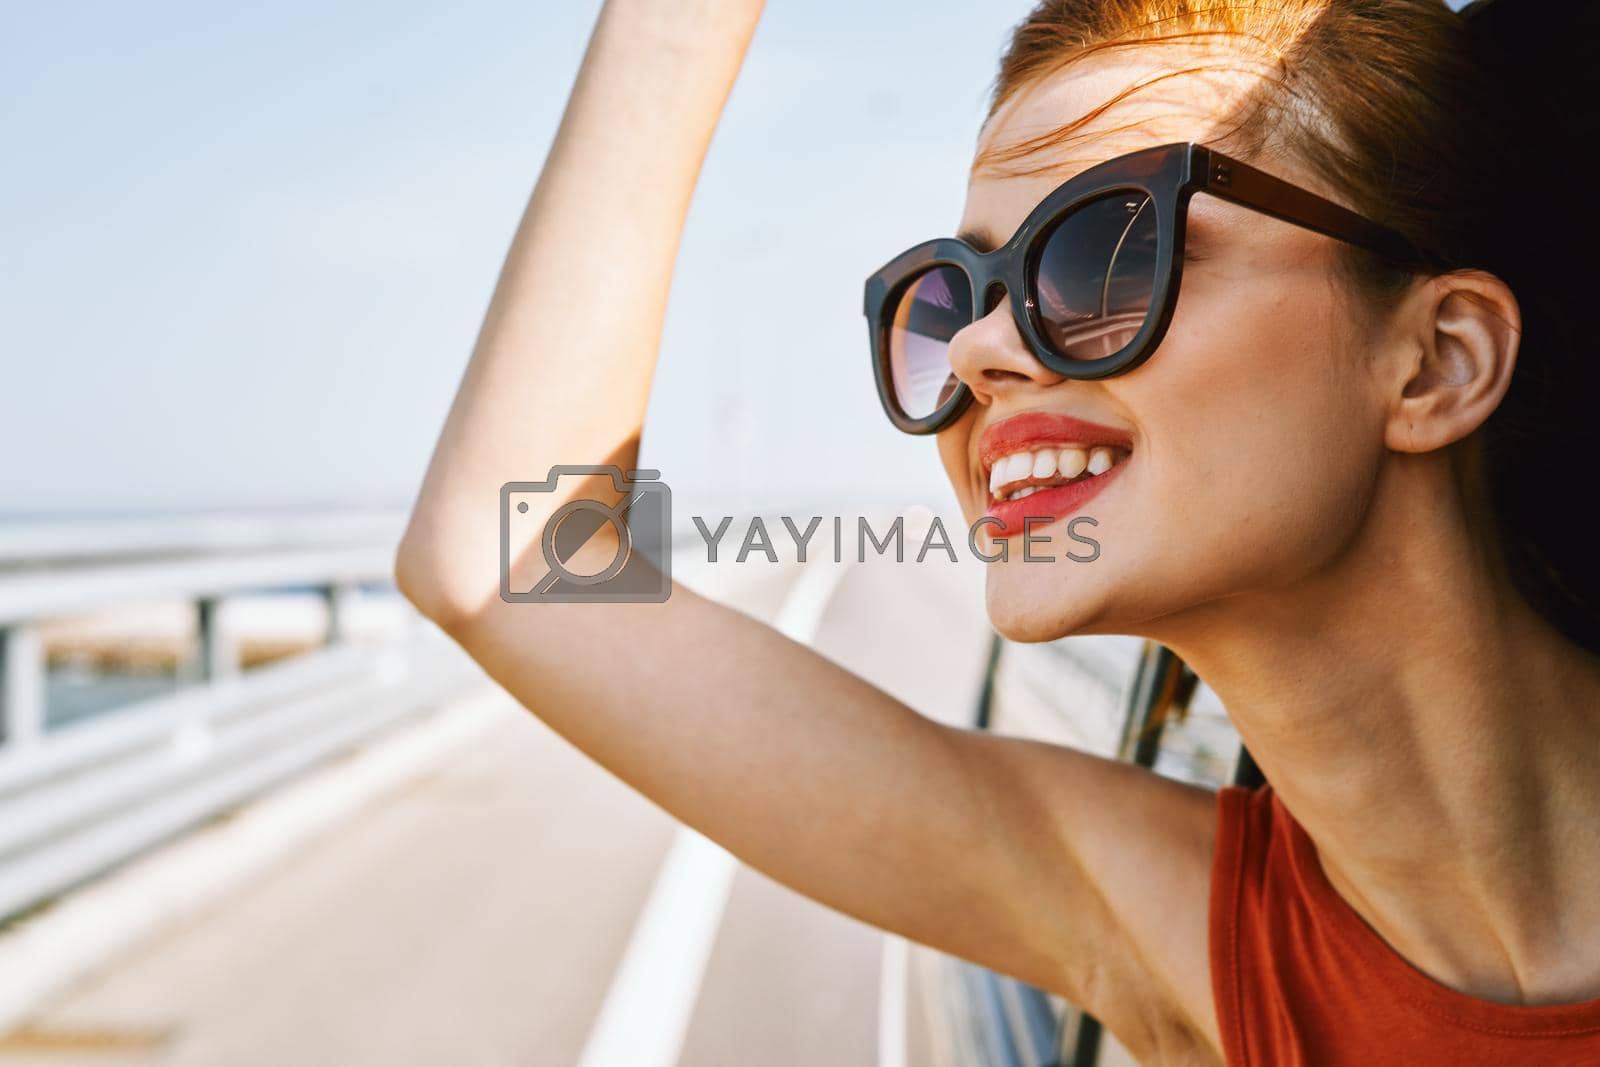 cheerful woman peeking out of the car window trip adventure lifestyle. High quality photo